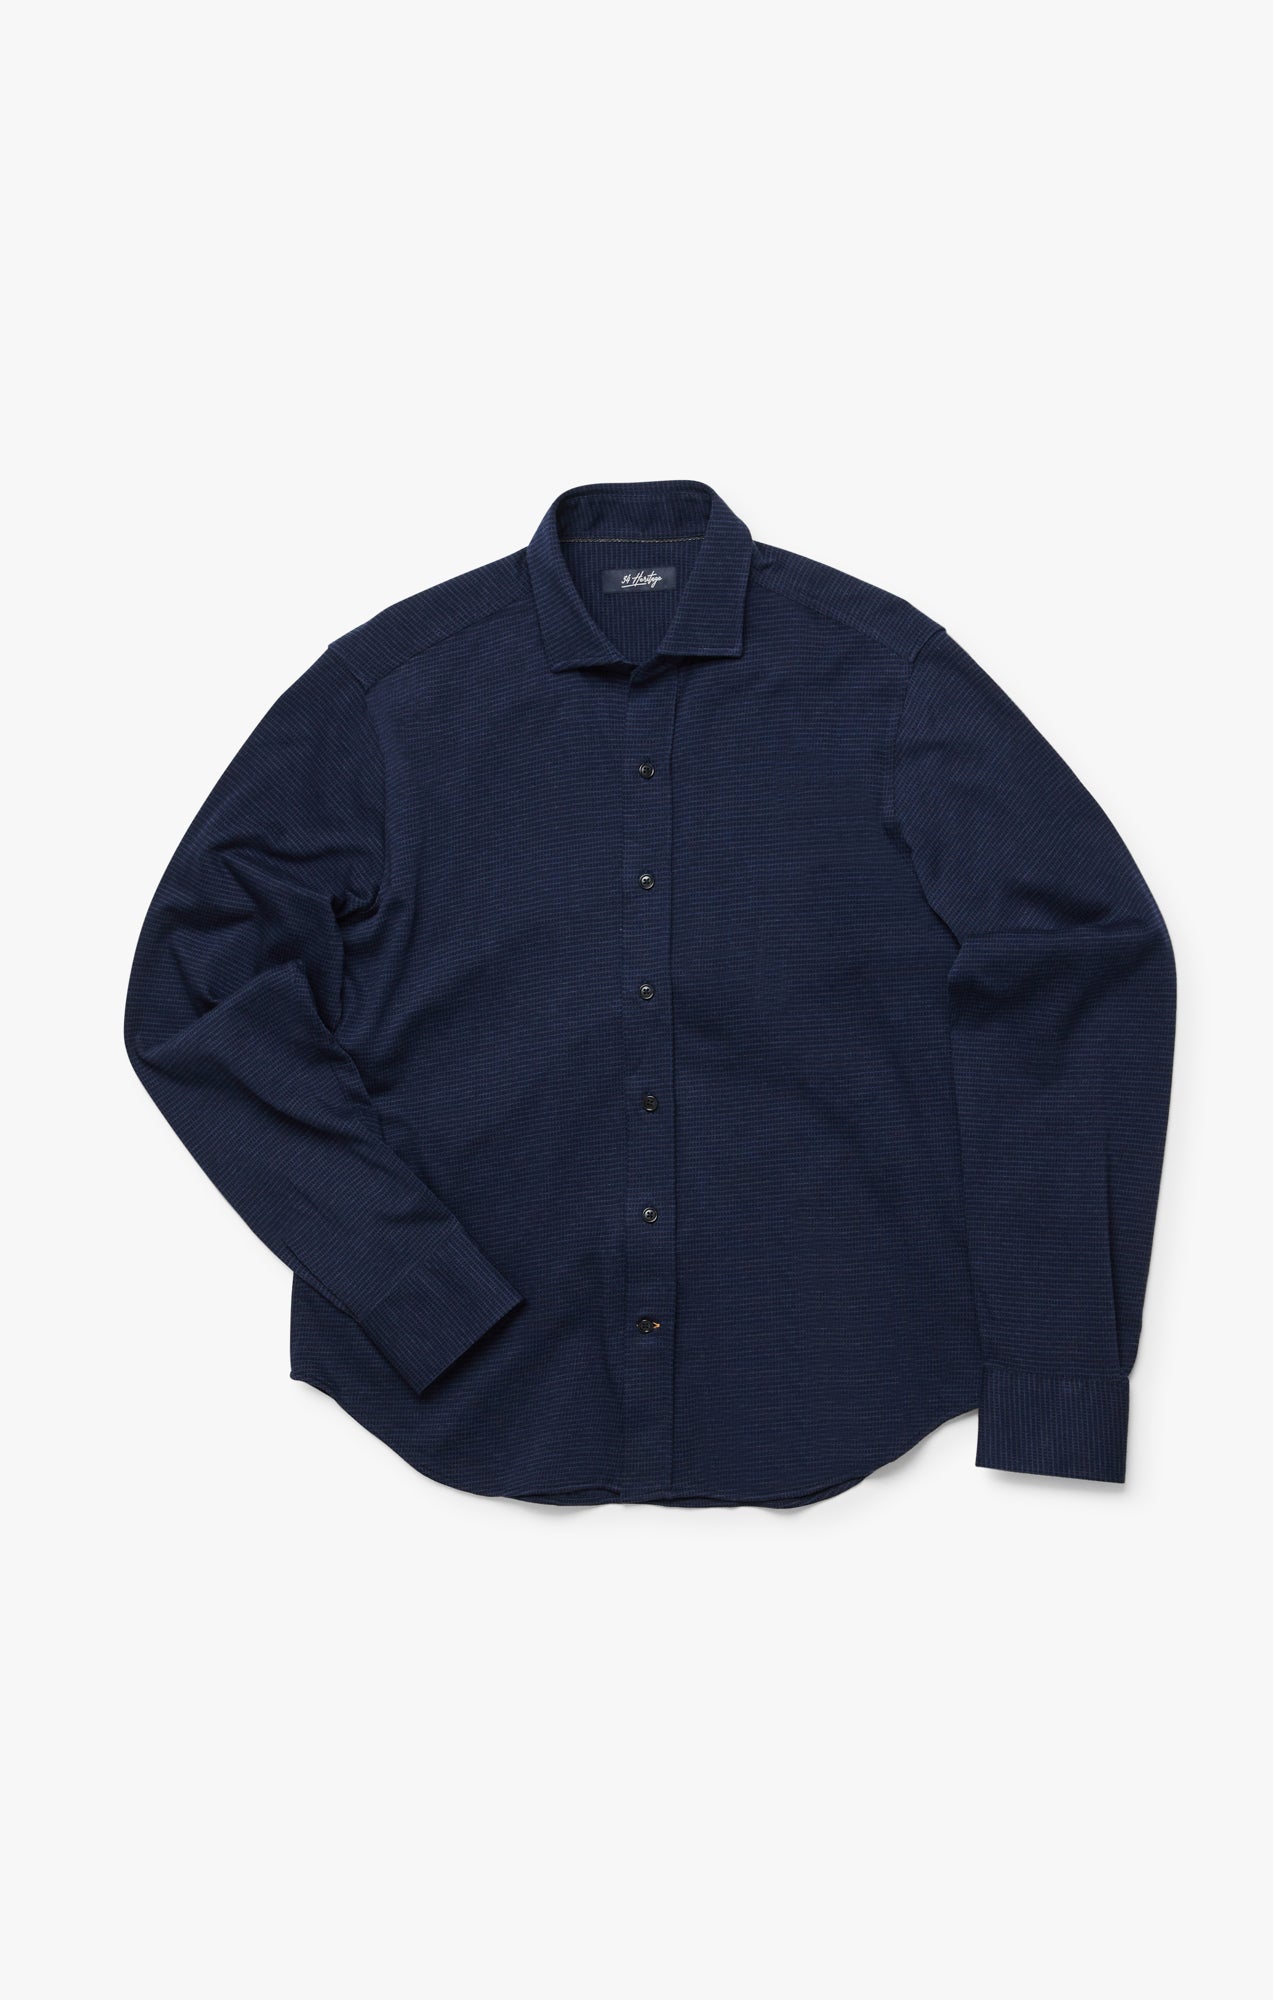 Structured Shirt In Navy Blue Image 8